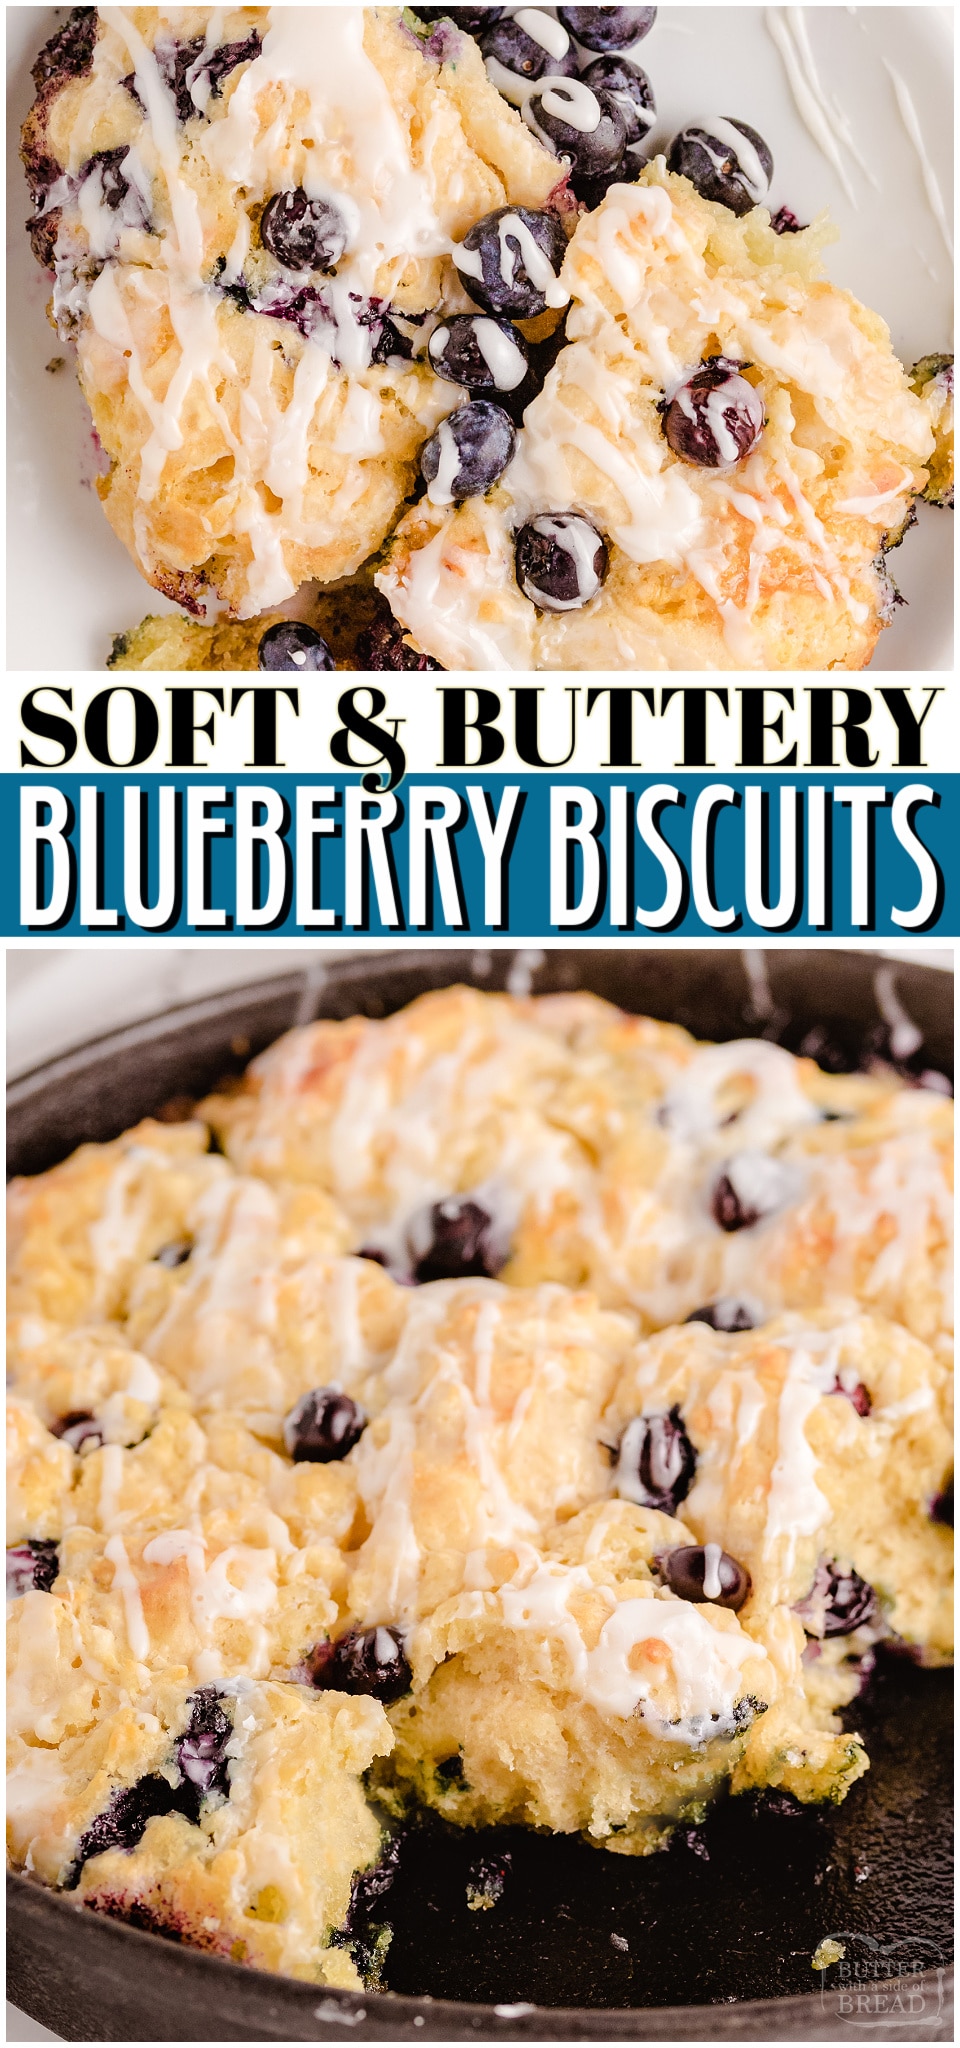 Blueberry Buttermilk Biscuits are soft and buttery and bursting with fresh blueberry flavor. Topped with an easy vanilla glaze, these sweet biscuits are perfect for breakfast or as a treat. One of my favorite biscuit recipes ever! #biscuits #blueberry #baking #buttermilk #easyrecipe from BUTTER WITH A SIDE OF BREAD